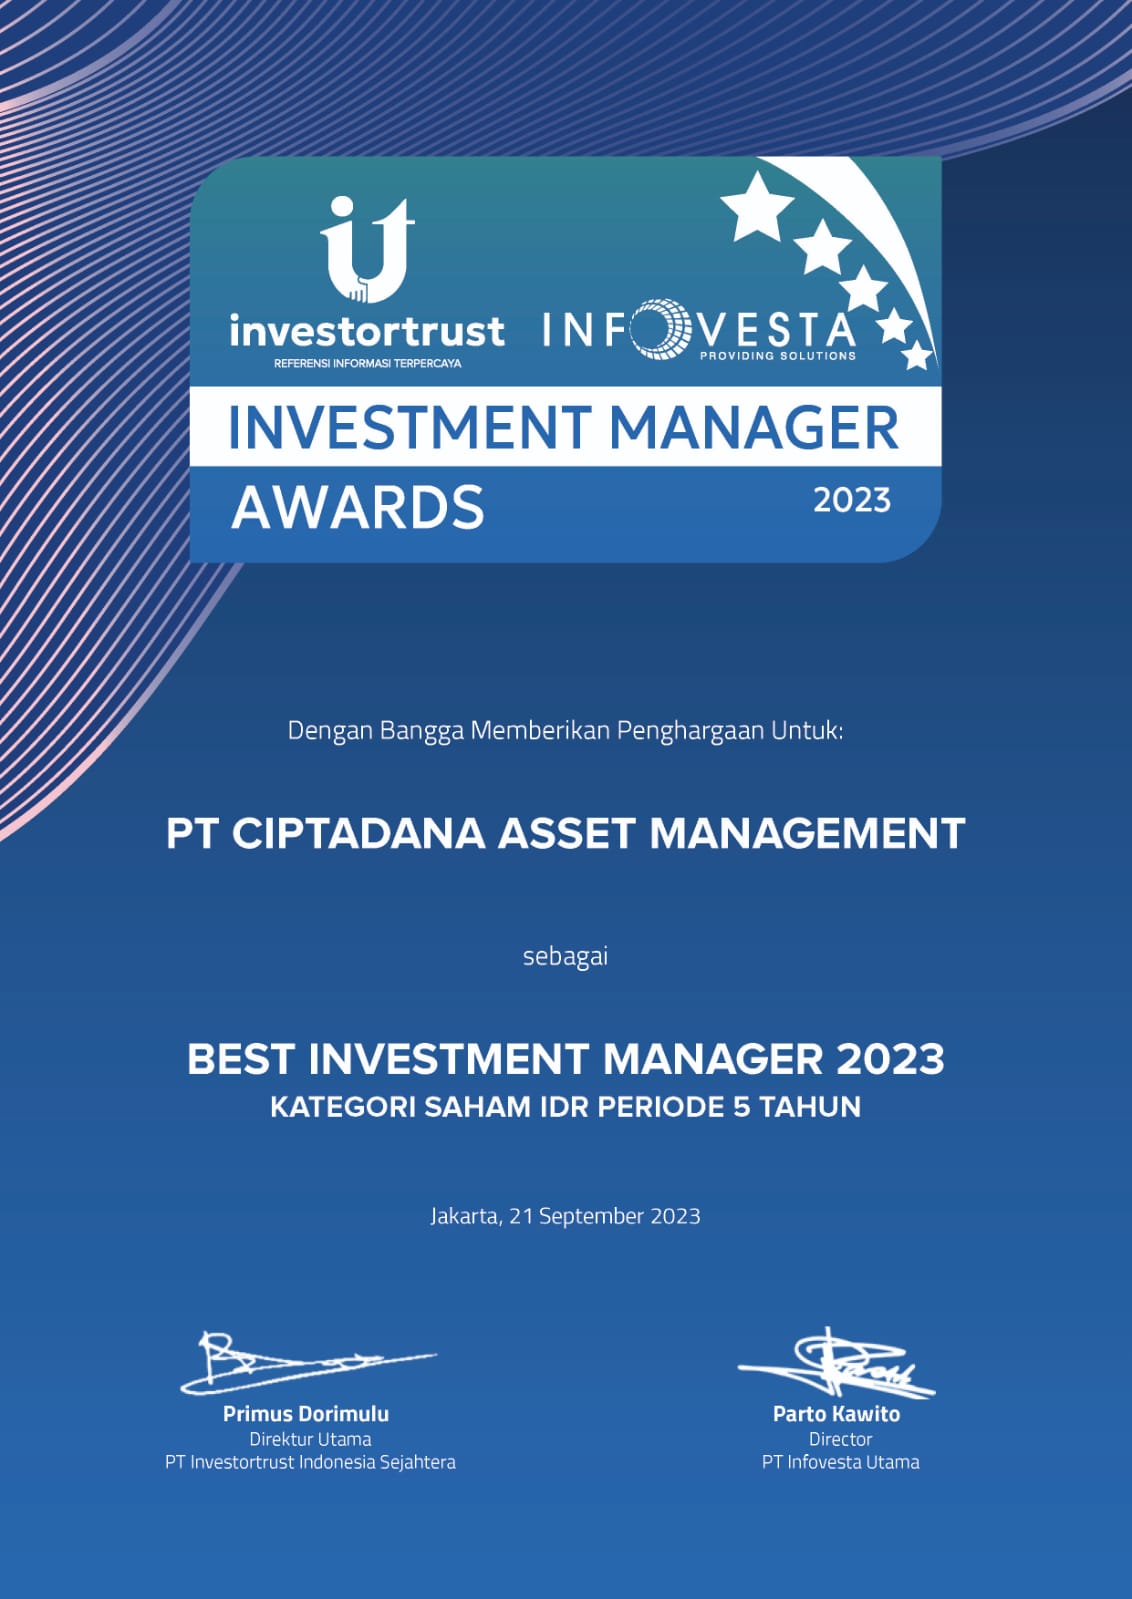 Best investment manager 5 tahun